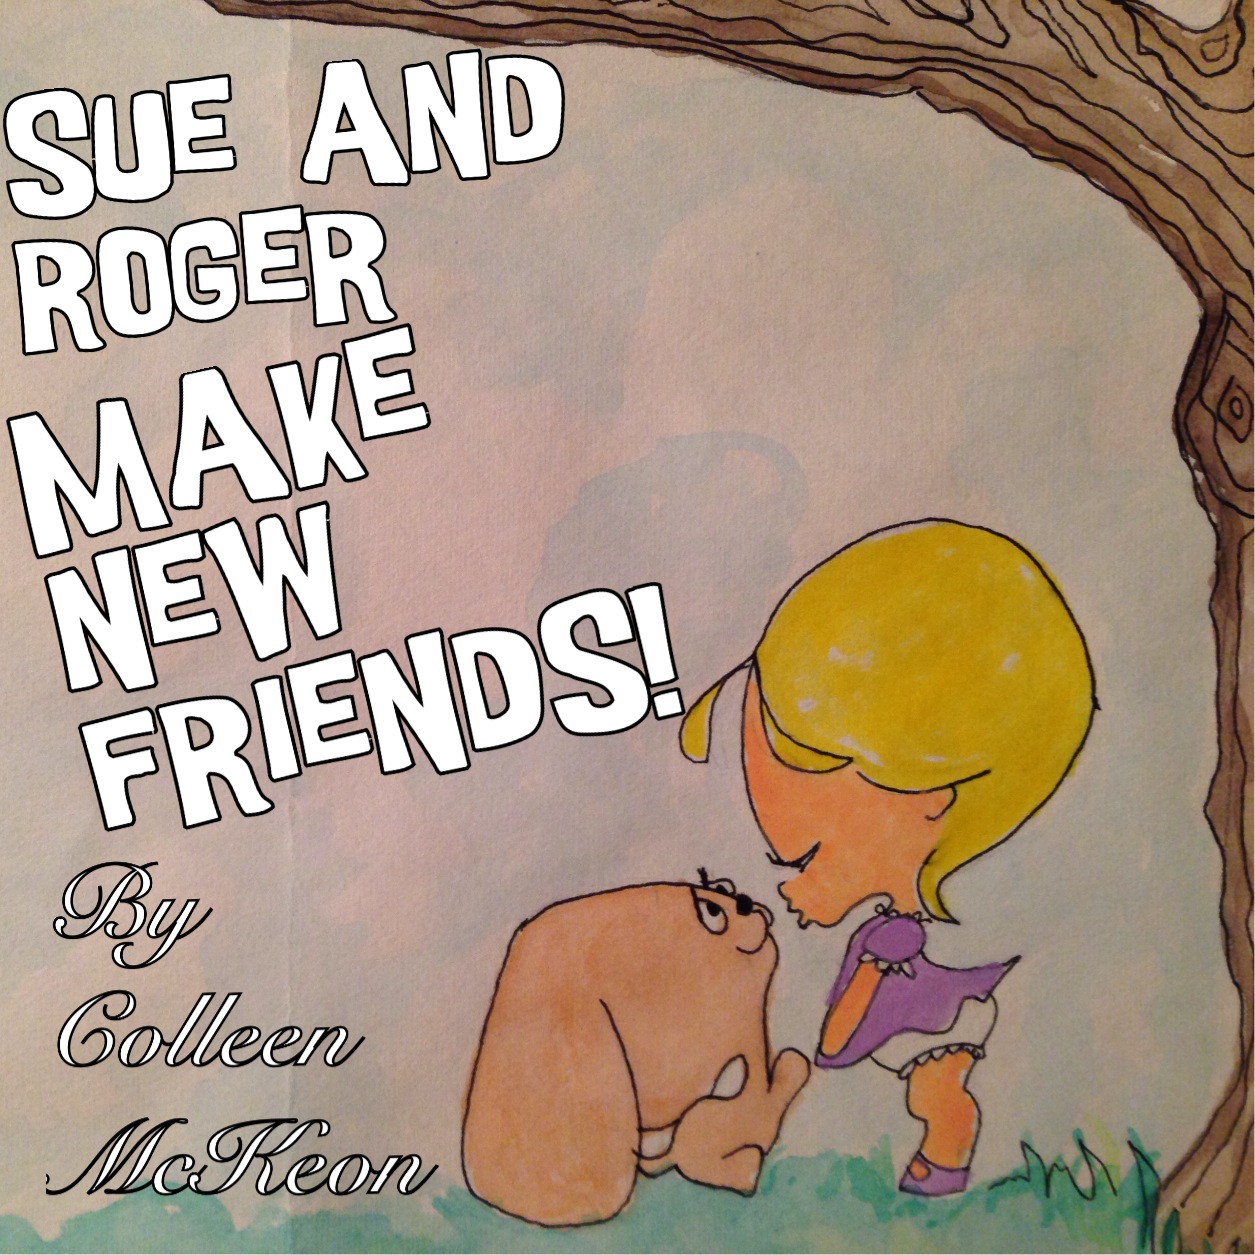 "Sue and Roger Make New Friends," now available on Amazon.com!